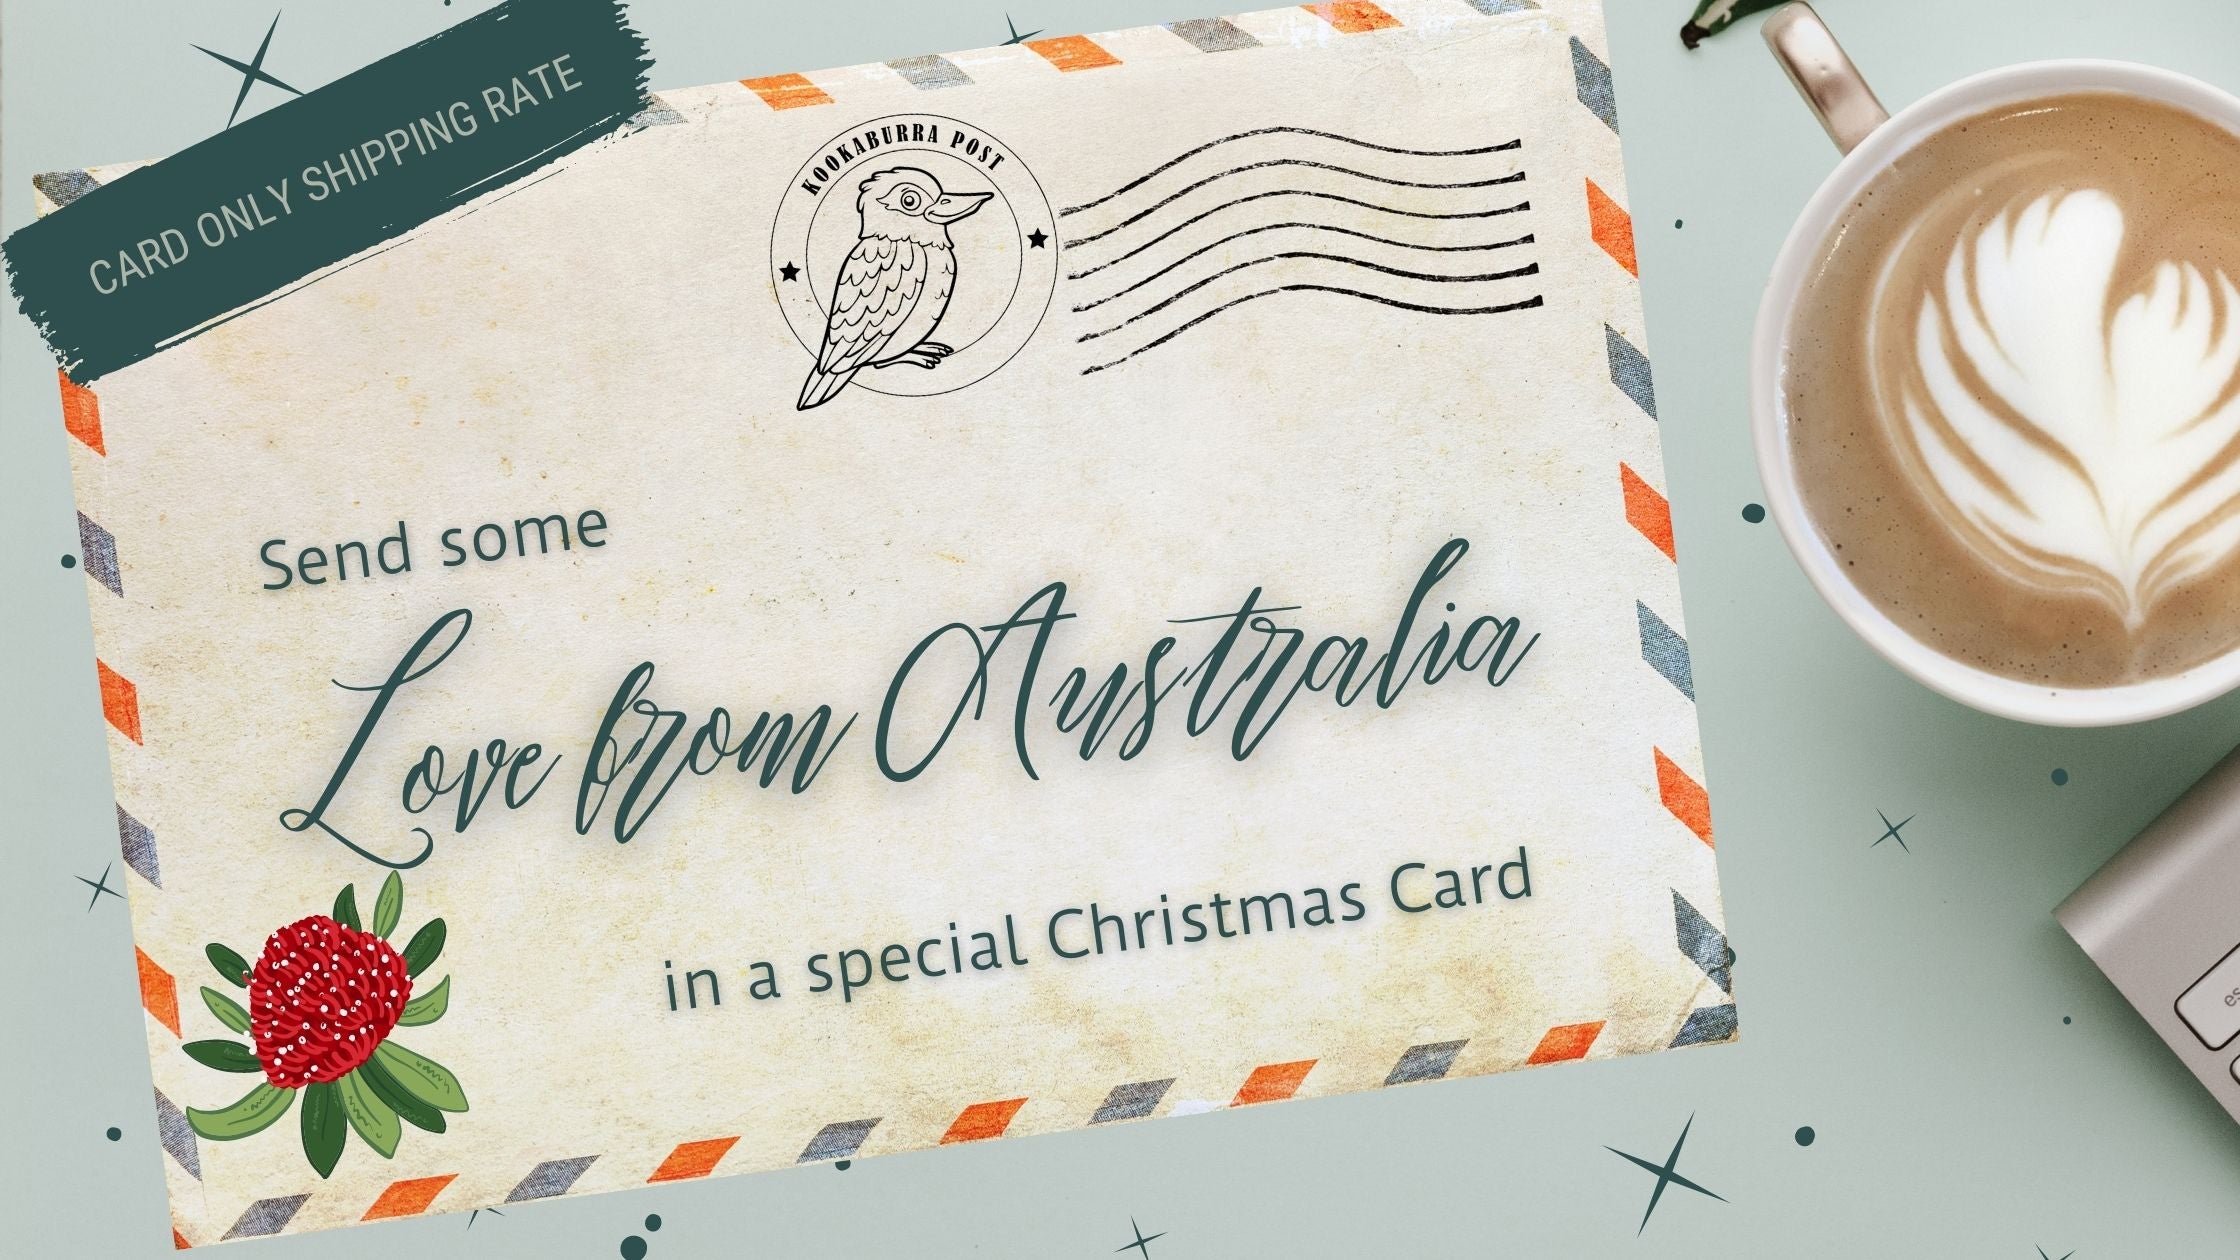 POST A CARD OVERSEAS FROM AUSTRALIA